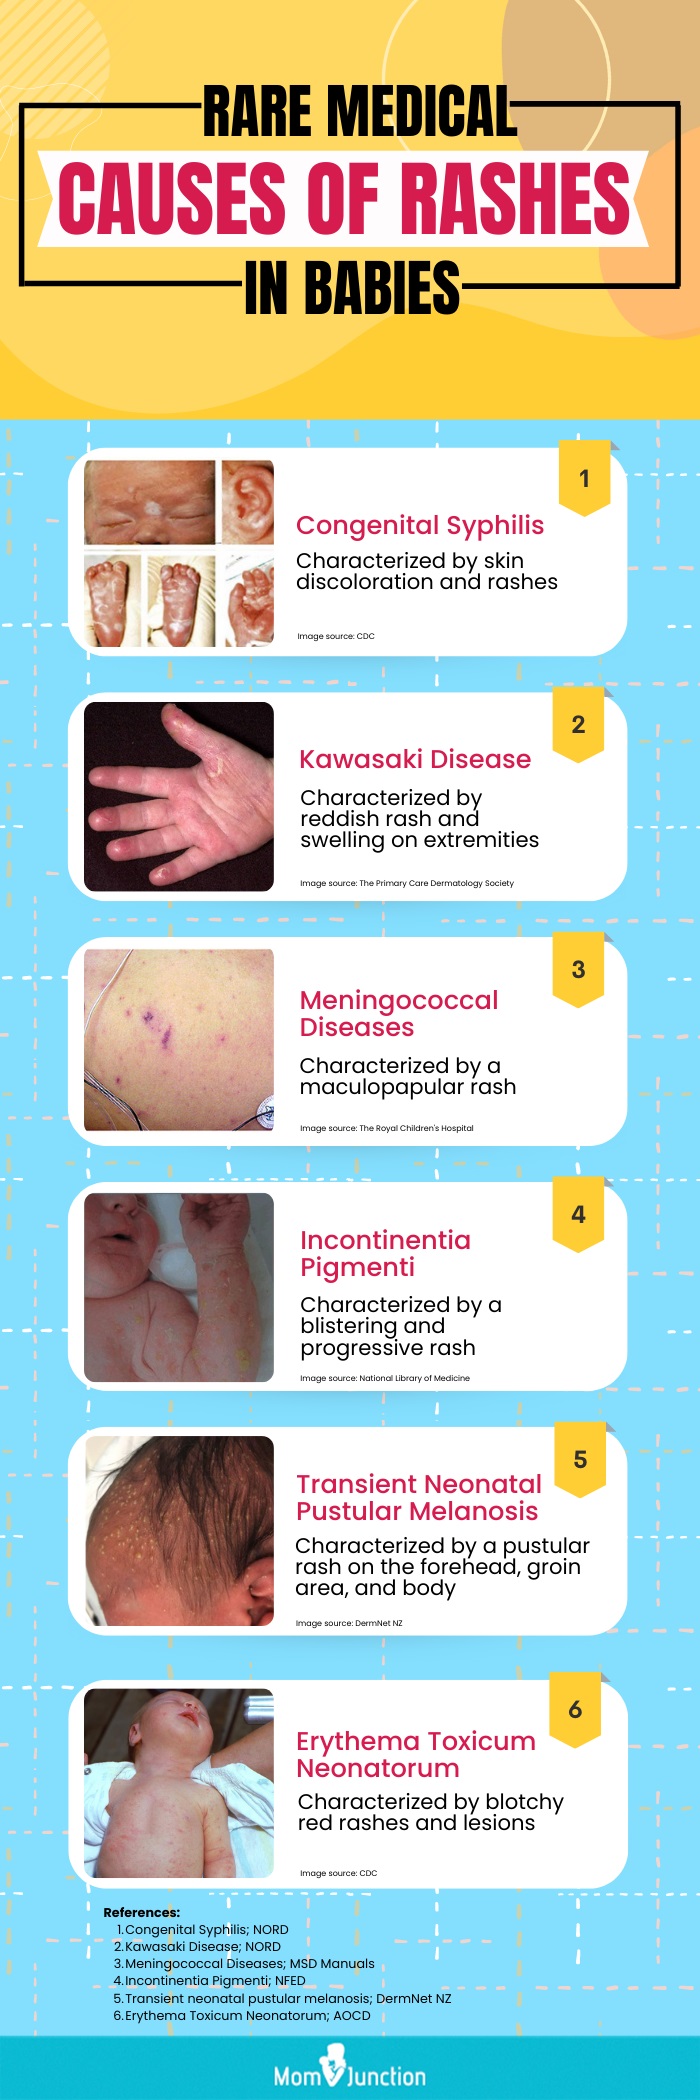 rare medical causes of rashes in babies (infographic)